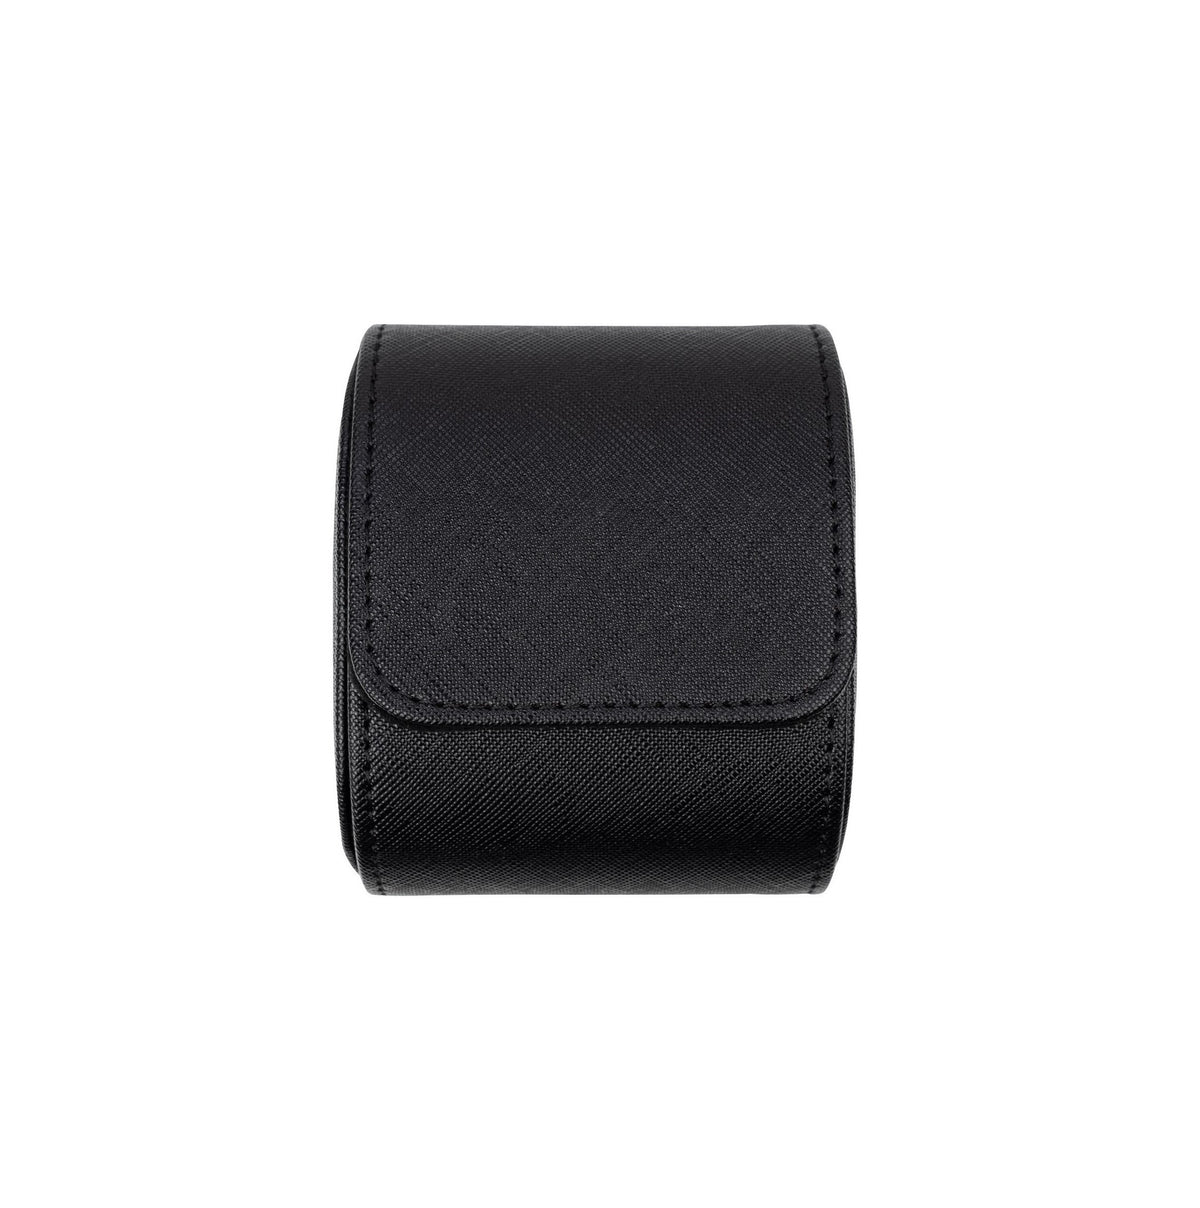 Saffiano Leather Watch Case in Black (1 Slot) - Nomad Watch Works MY